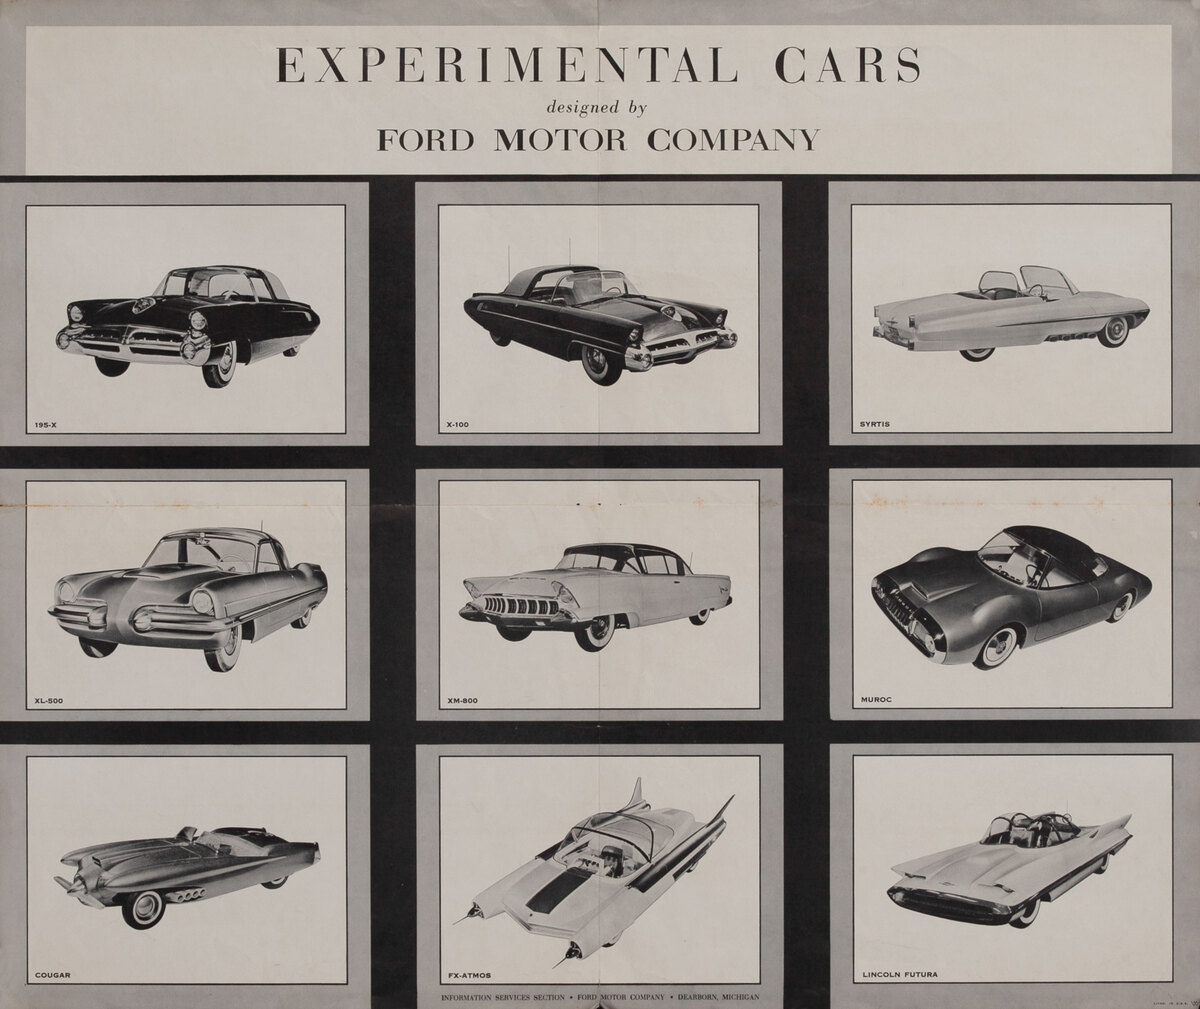 Experimmental Cars designed by Ford Motor Company